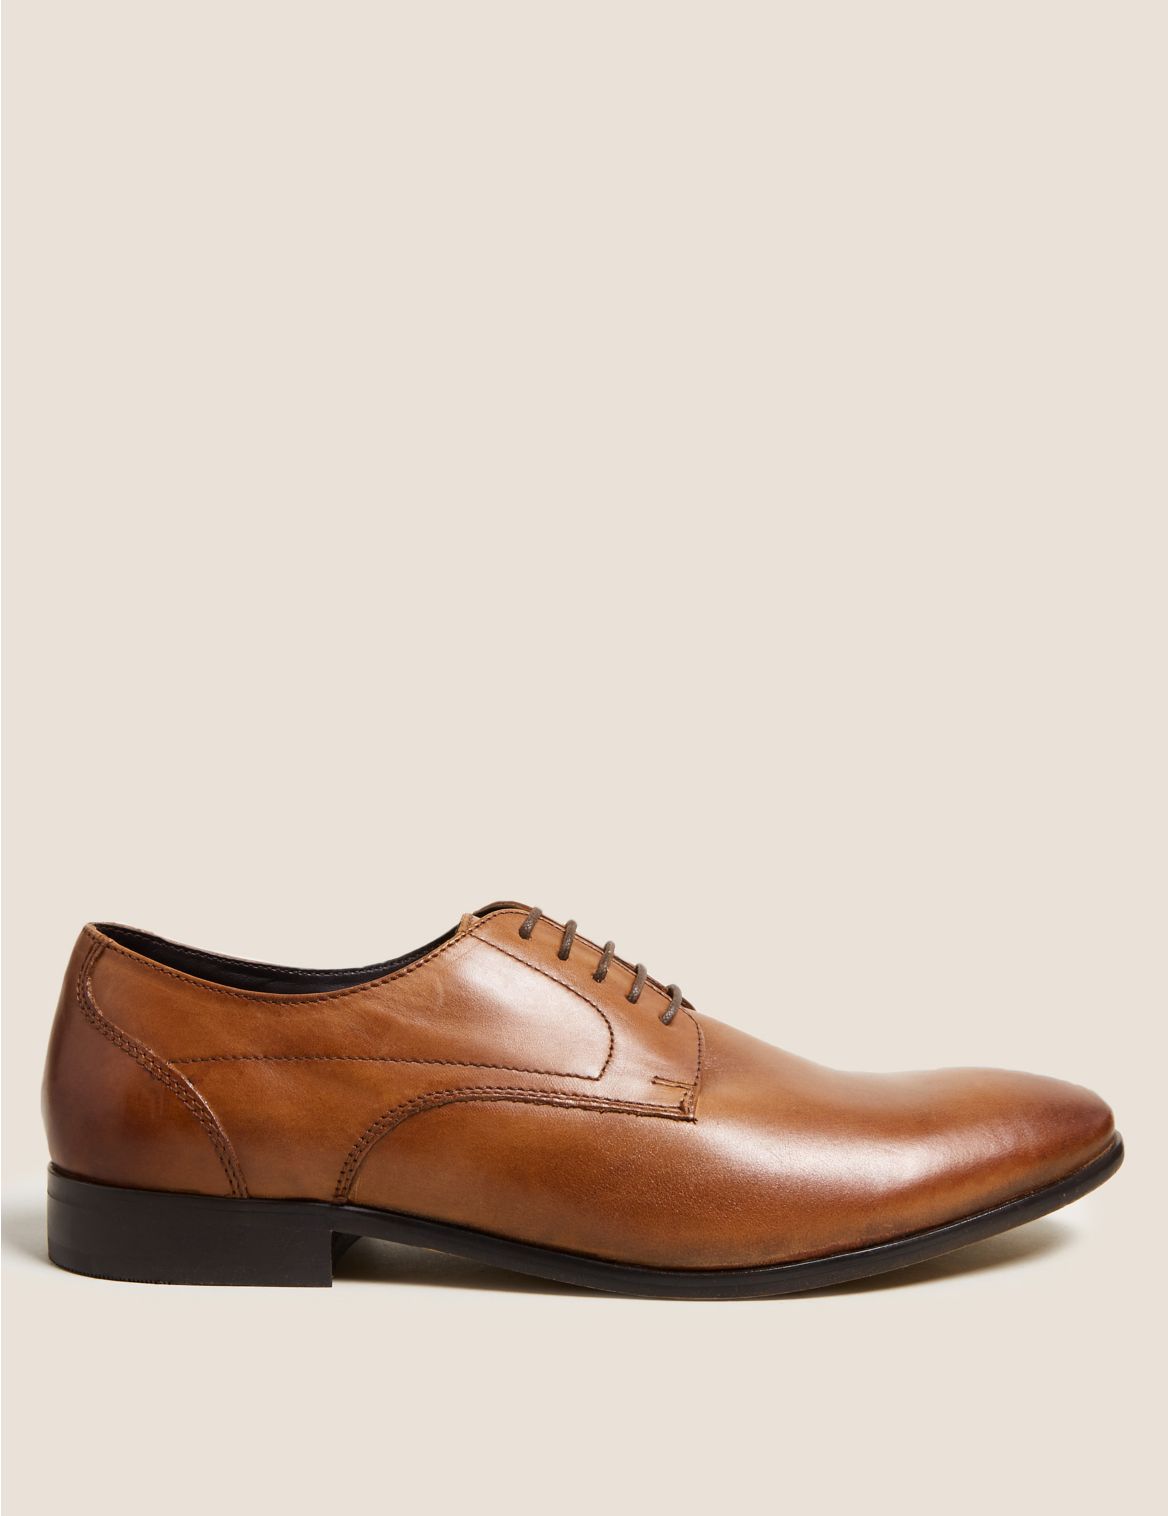 Leather Almond Toe Derby Shoes brown